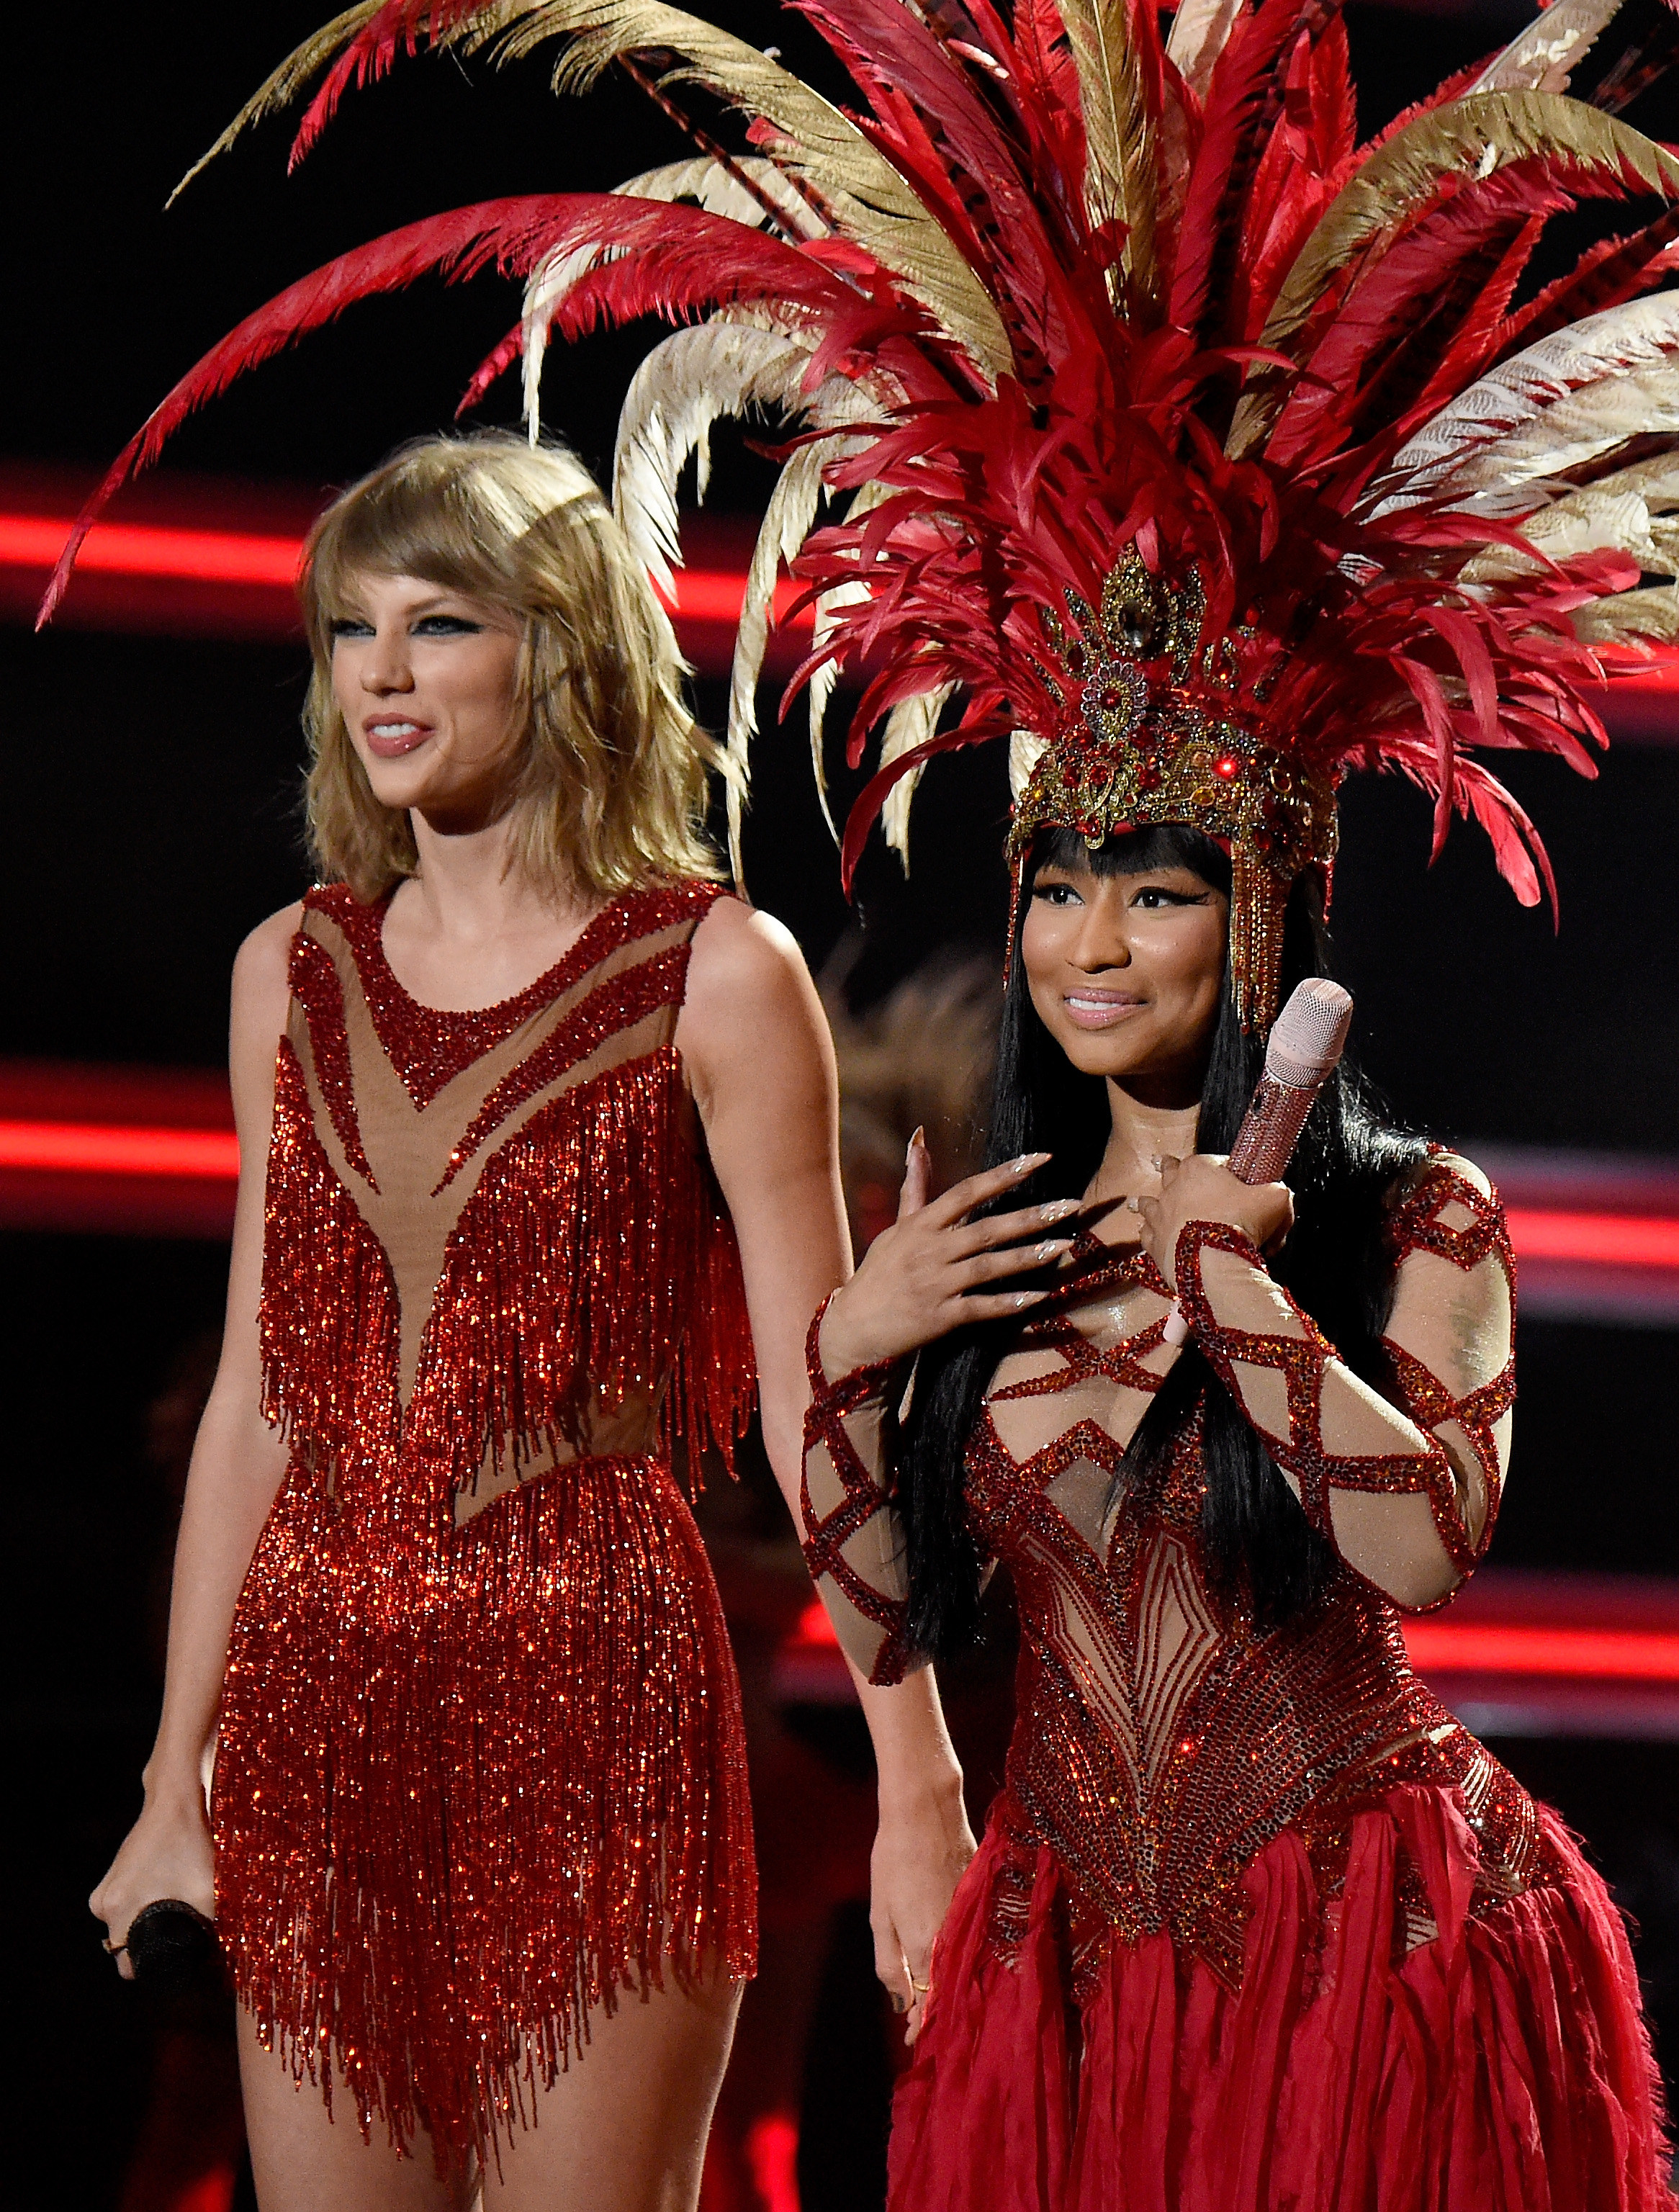 Taylor Swift and Nicki Minaj stand on stage holding microphones in matching red glittery outfits